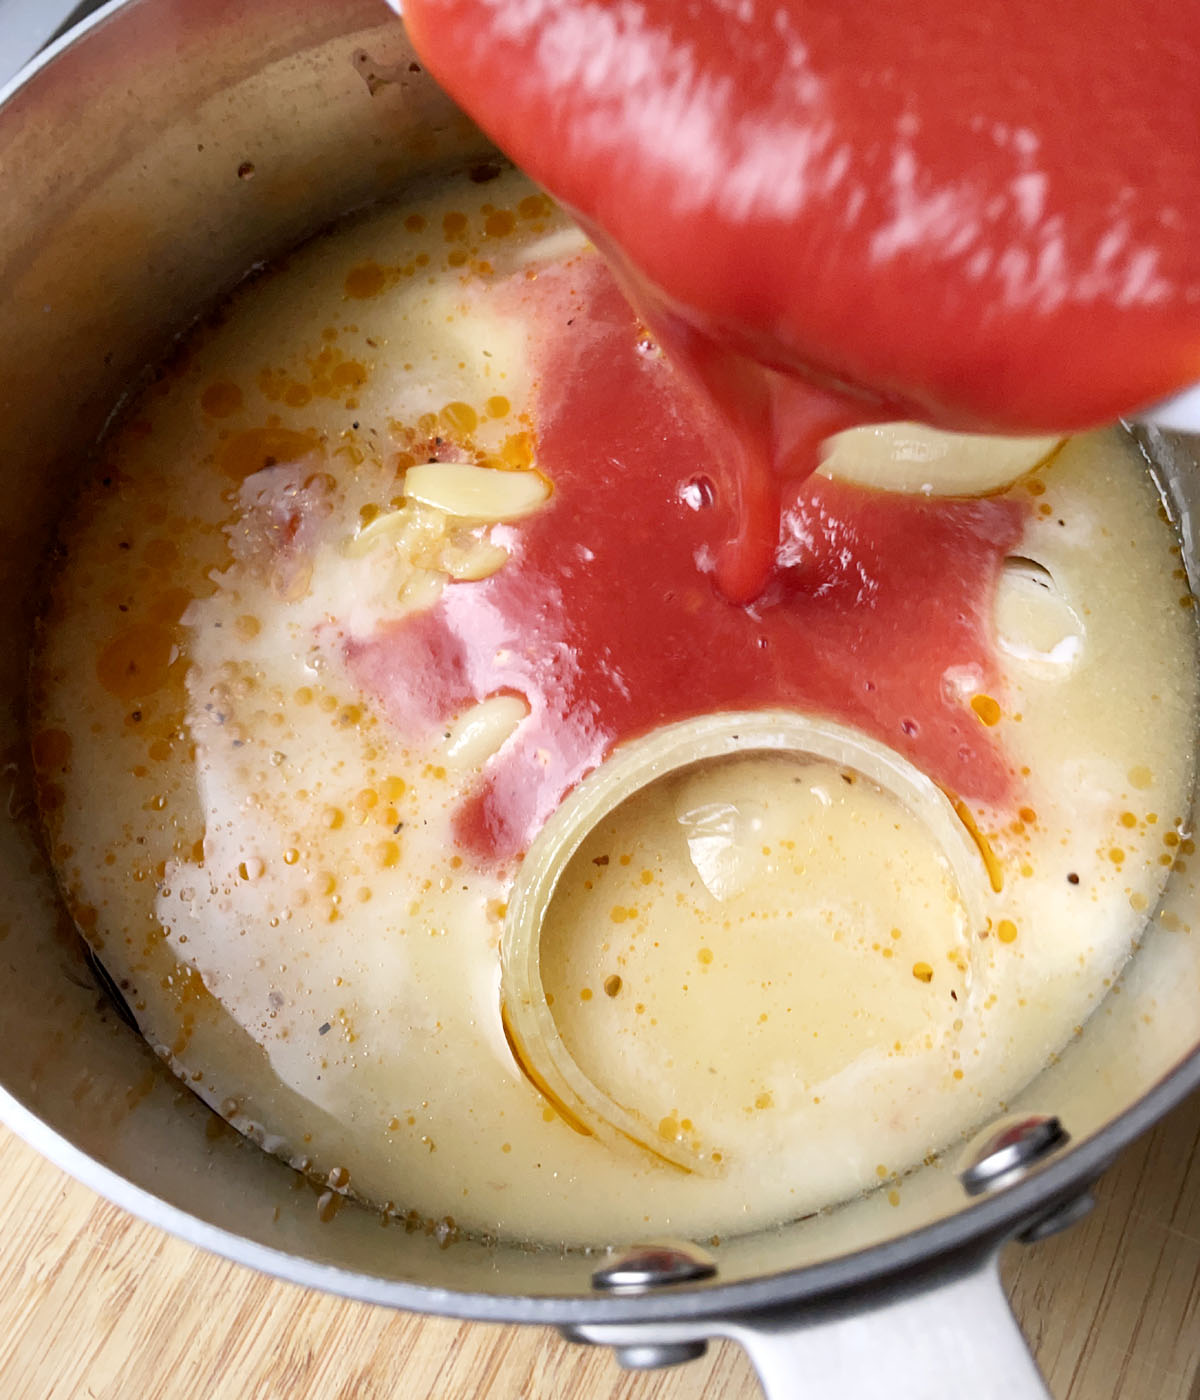 Red tomato sauce being poured into a pot containing onions and a milky liquid.